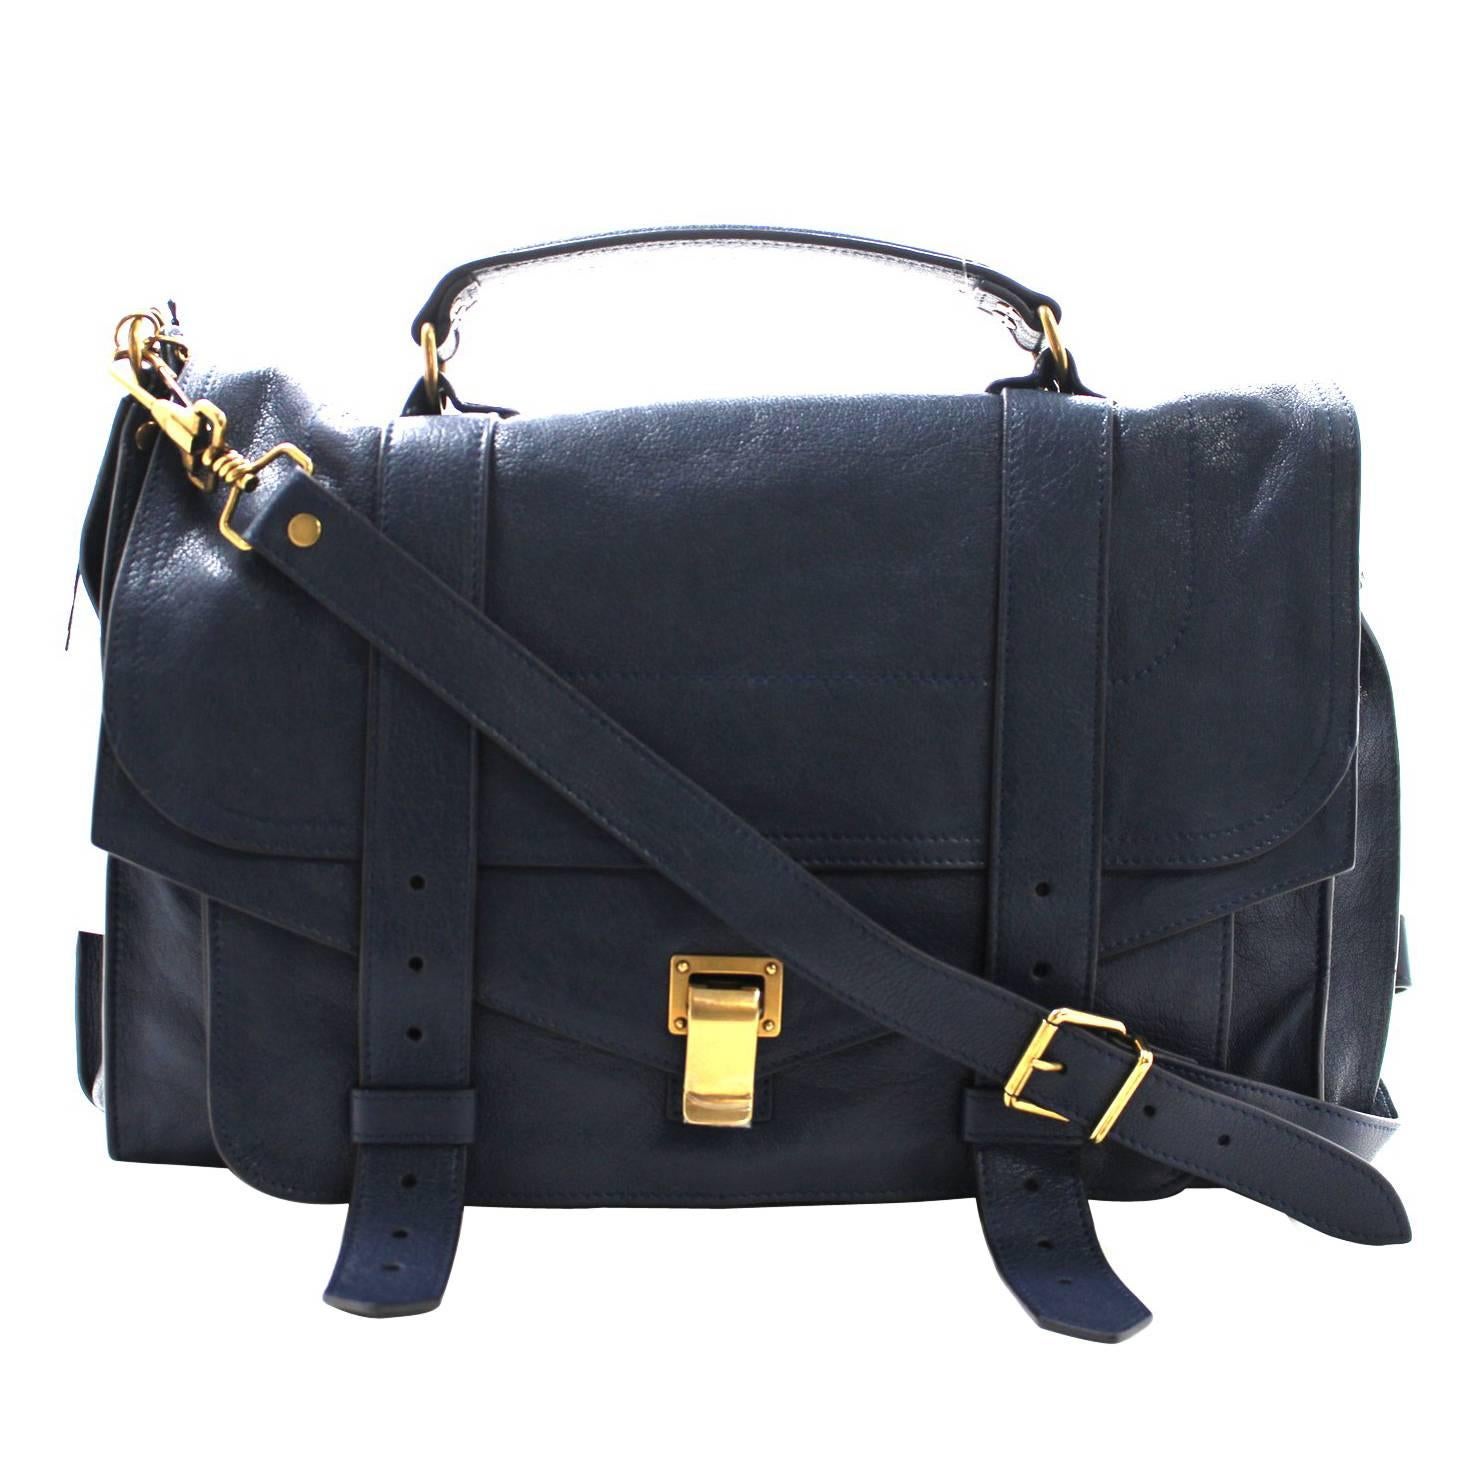 Proenza Schouler PS1 Large Lux Messenger Bag- Midnight Blue Leather